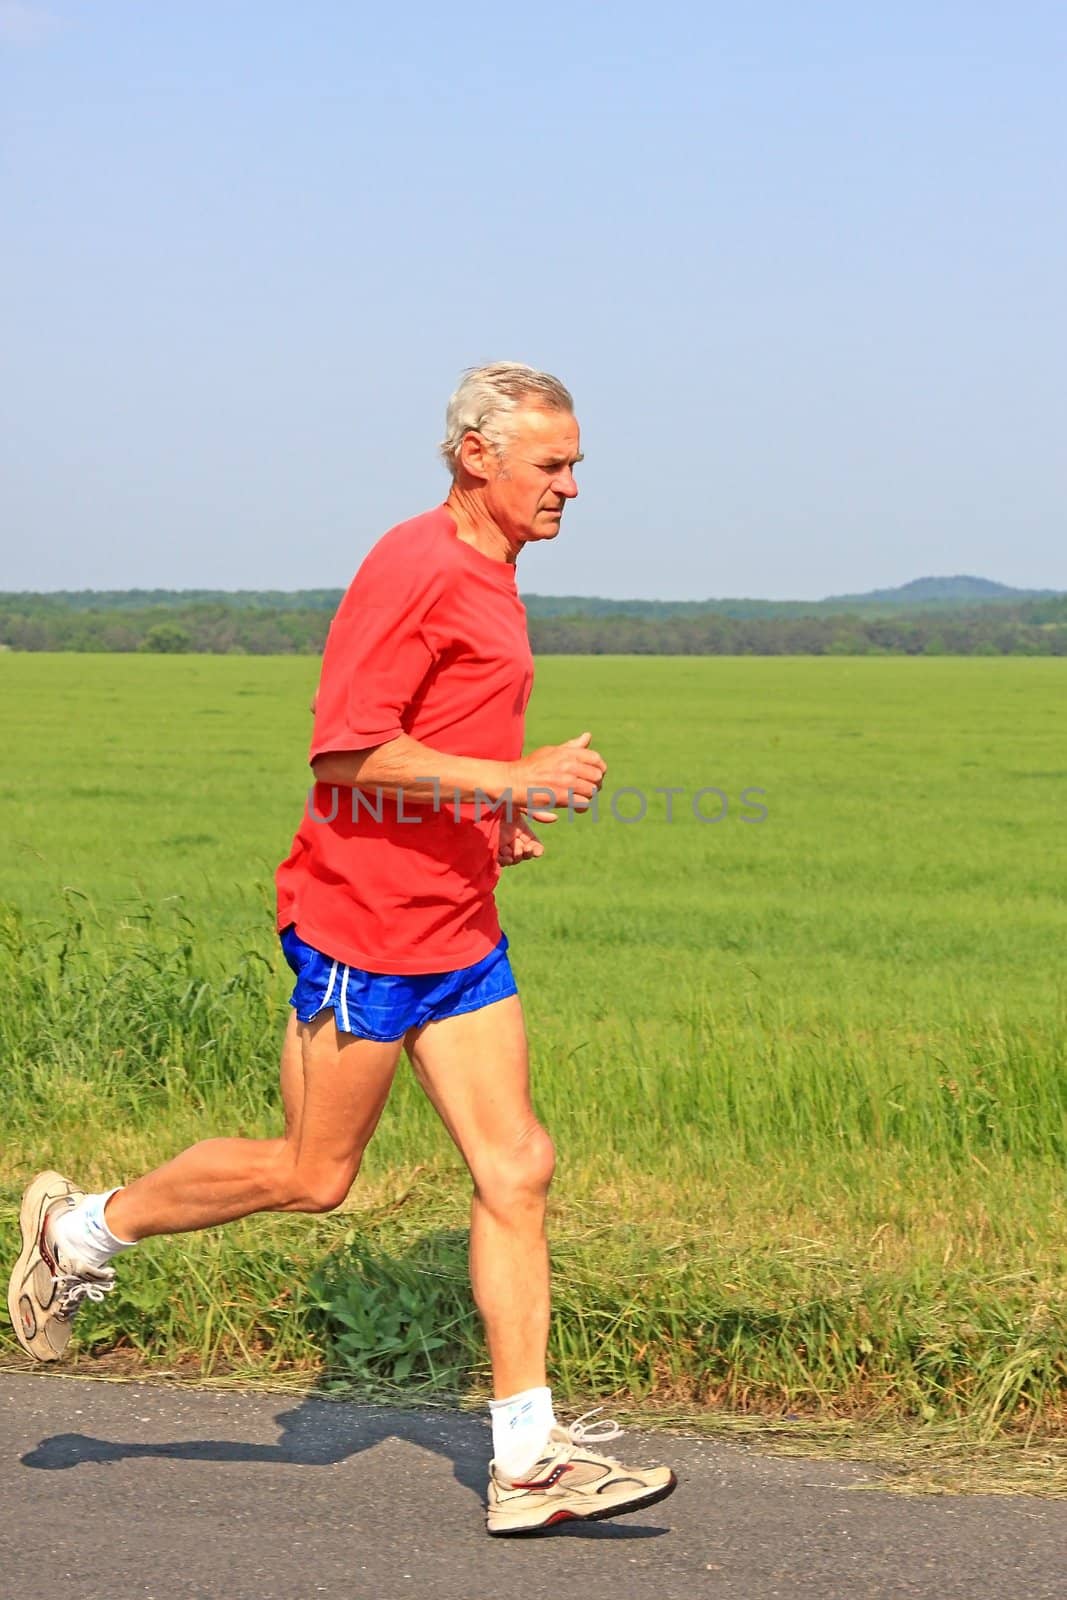 Senior runner while training for a competition